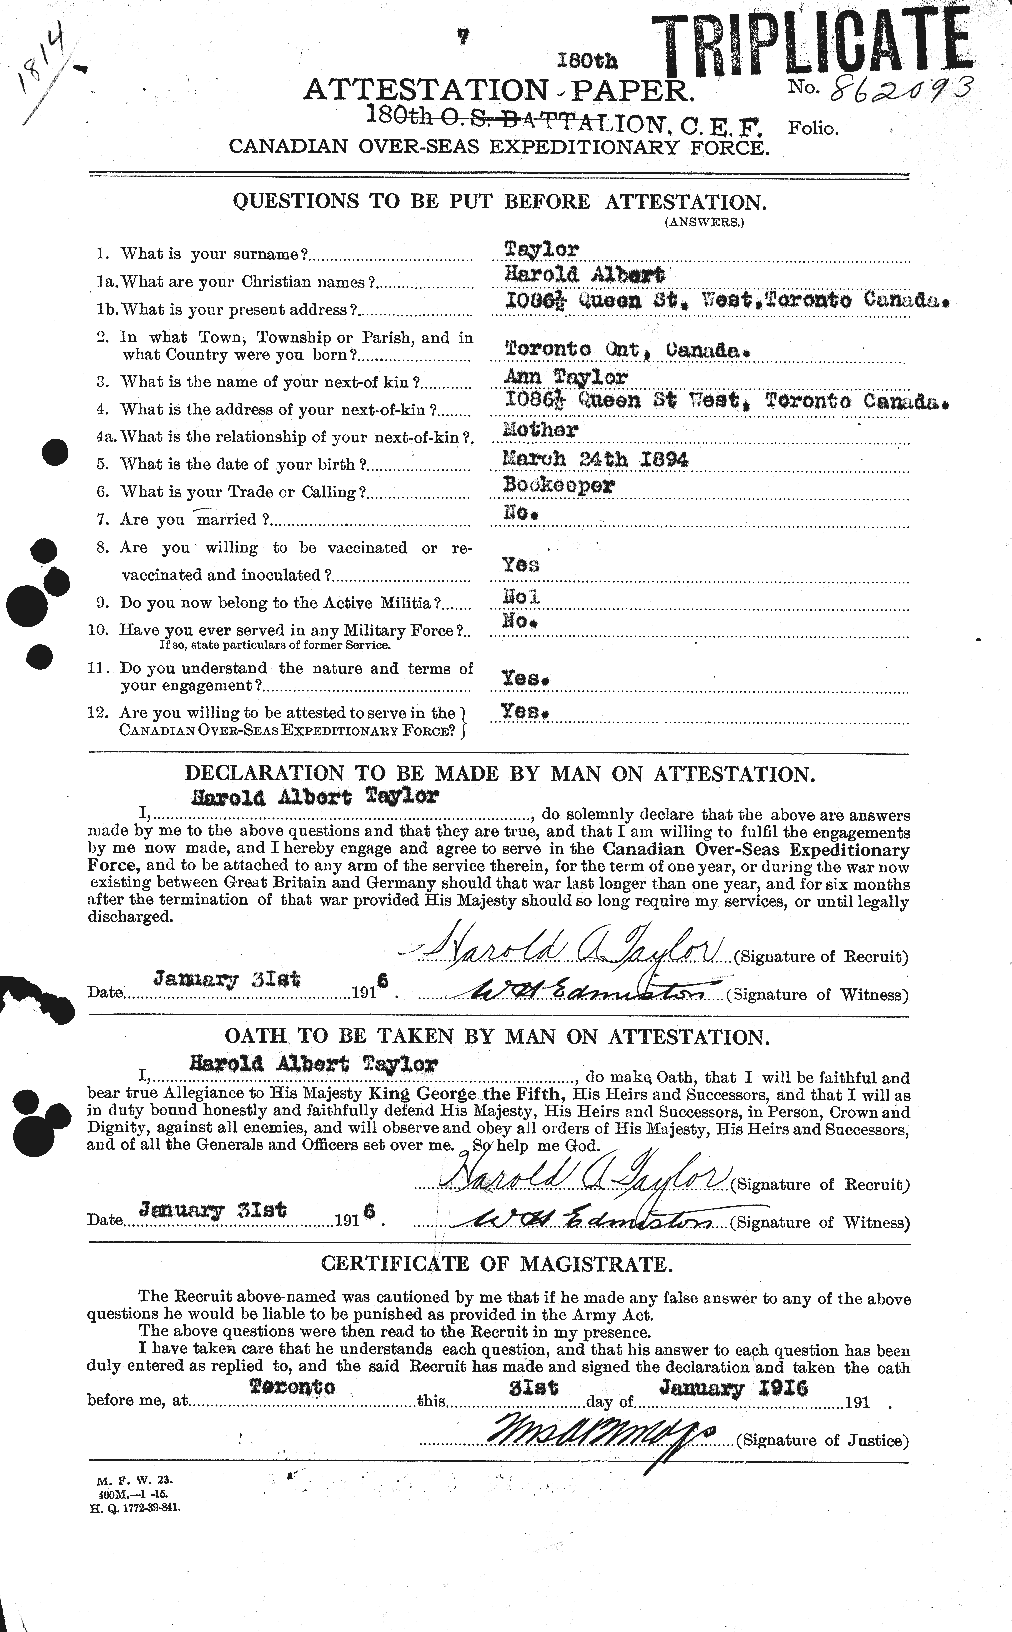 Personnel Records of the First World War - CEF 626413a